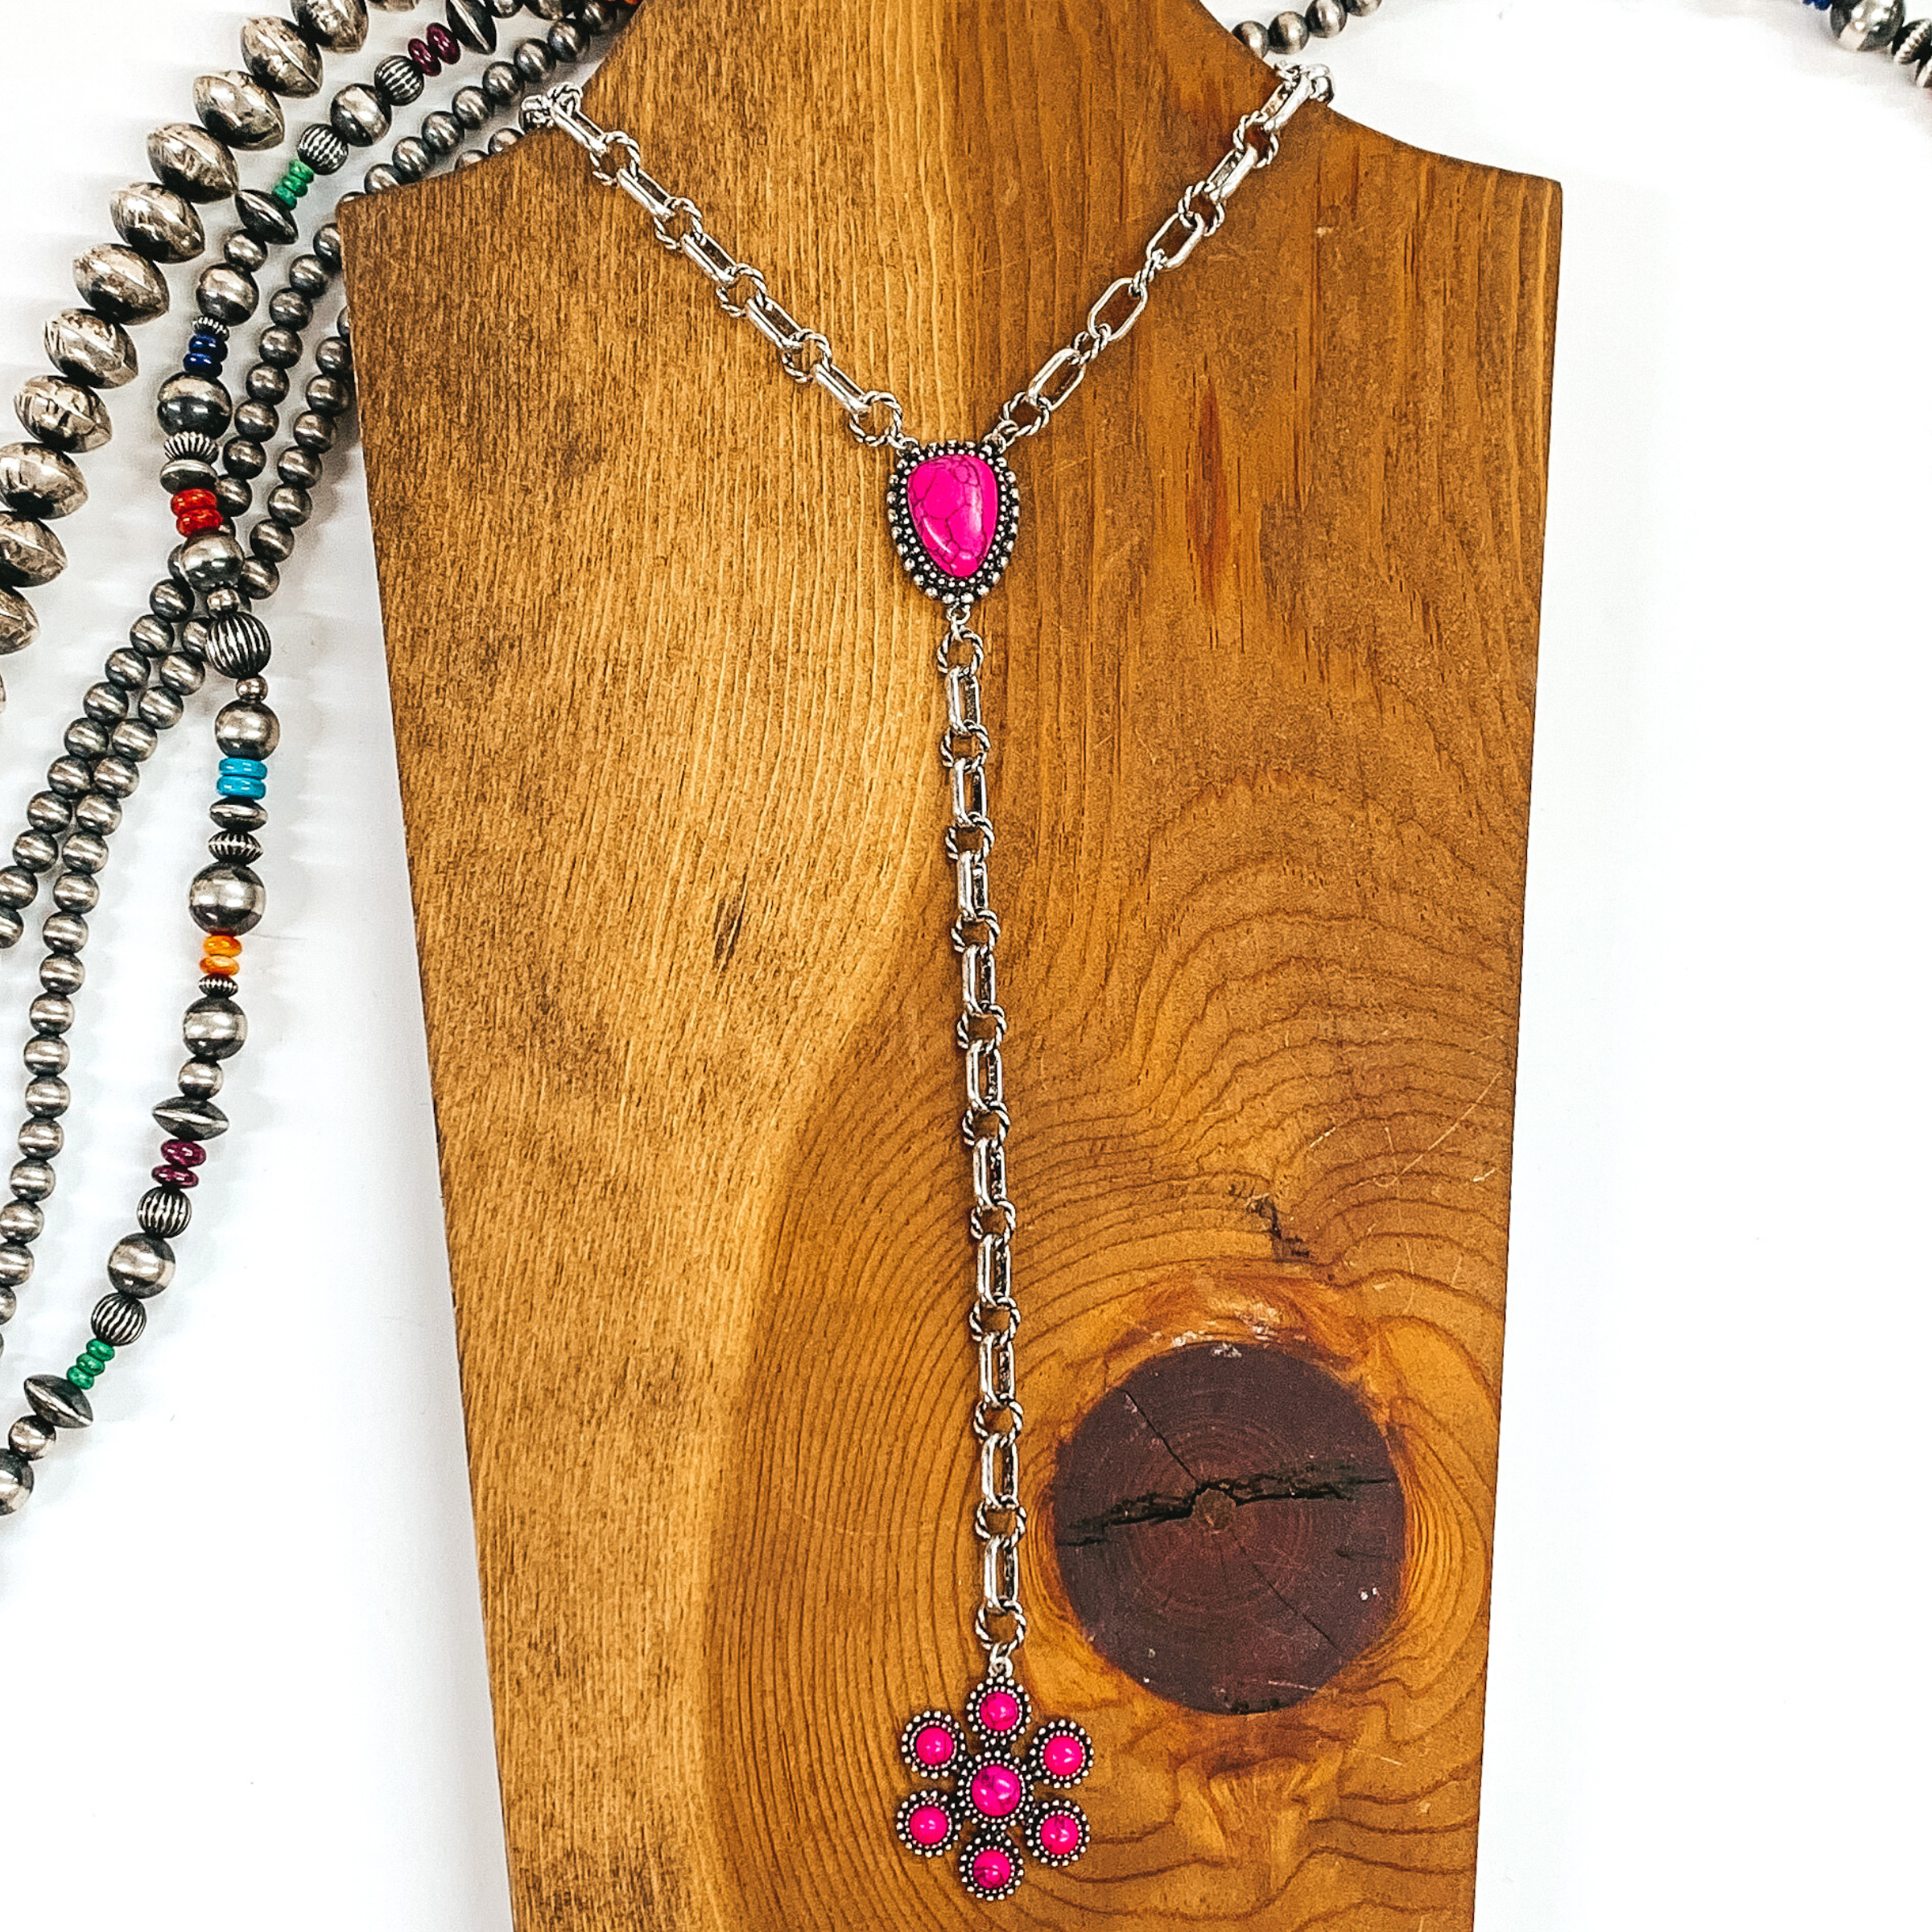 Silver chained necklace that is Navajo inspired with a pink irregular stoned pendant. Then hanging from the pendant, there is a hanging silver chain with a star burst pendant with pink stones. This necklace is pictured on  wood necklace holder on a white background. It has different shaped and colored Navajo strands. 